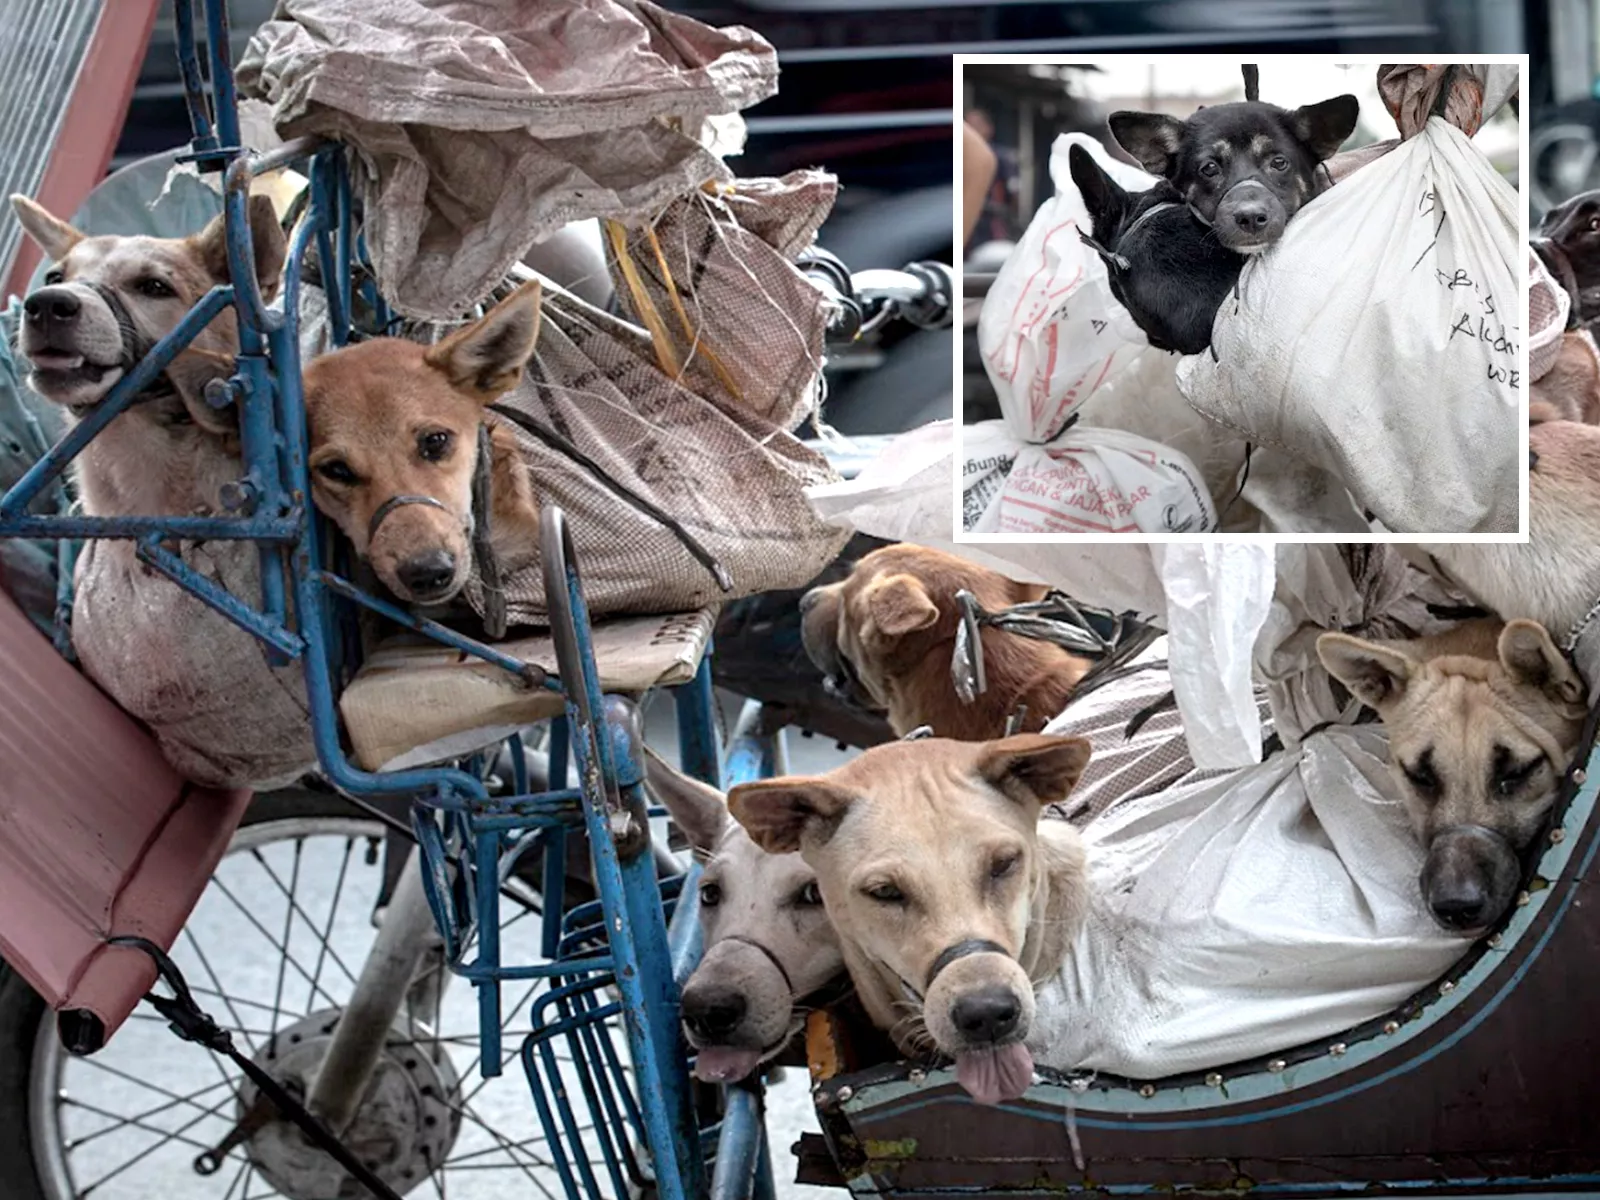 Dog Meat Porn - Dogs Dismembered and Sold for Meat at Indonesia Wet Markets, Despite Ban